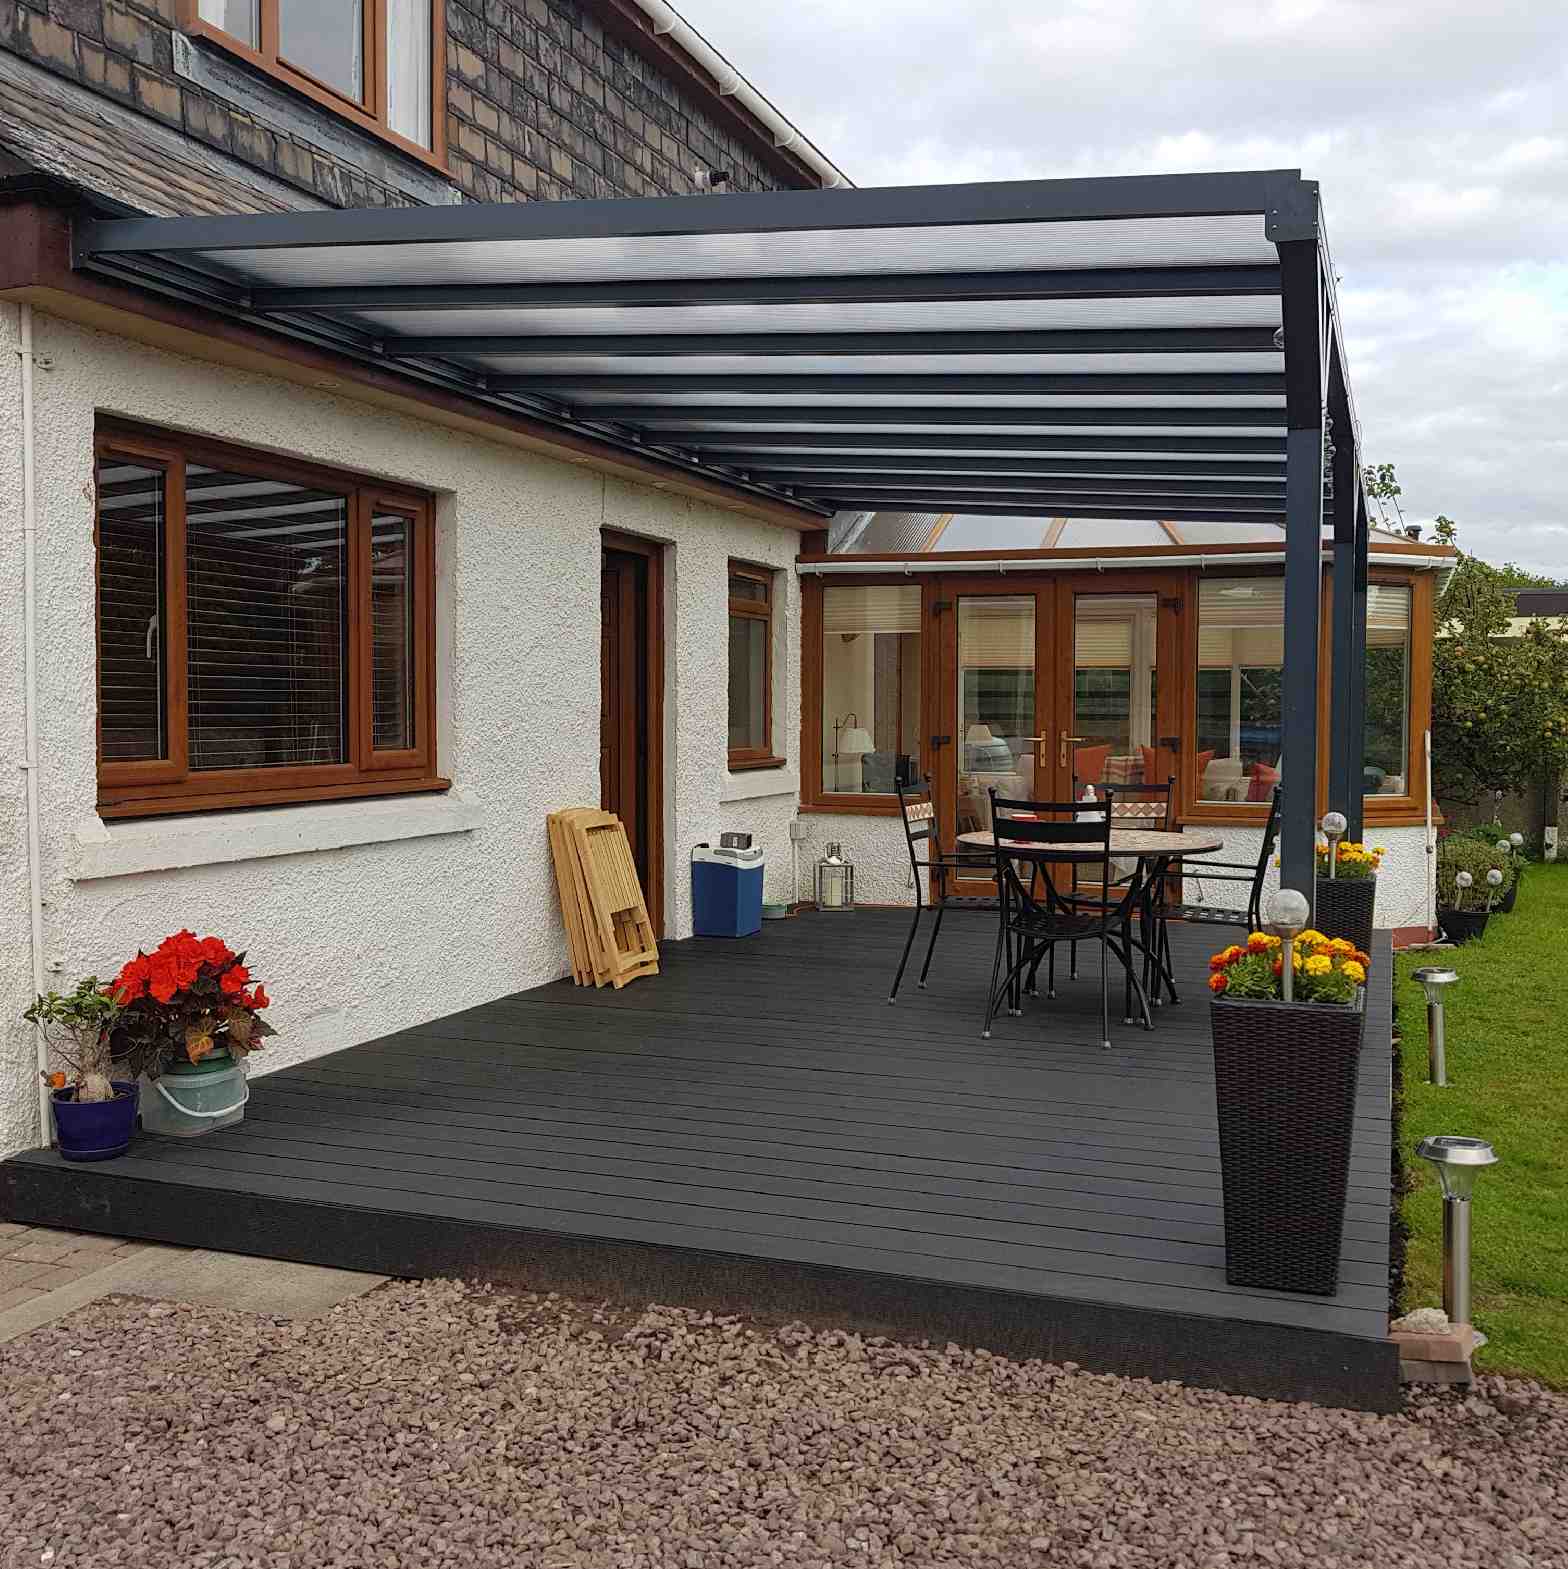 Buy Omega Verandah, Anthracite Grey, 16mm Polycarbonate Glazing - 3.5m (W) x 3.5m (P), (3) Supporting Posts online today